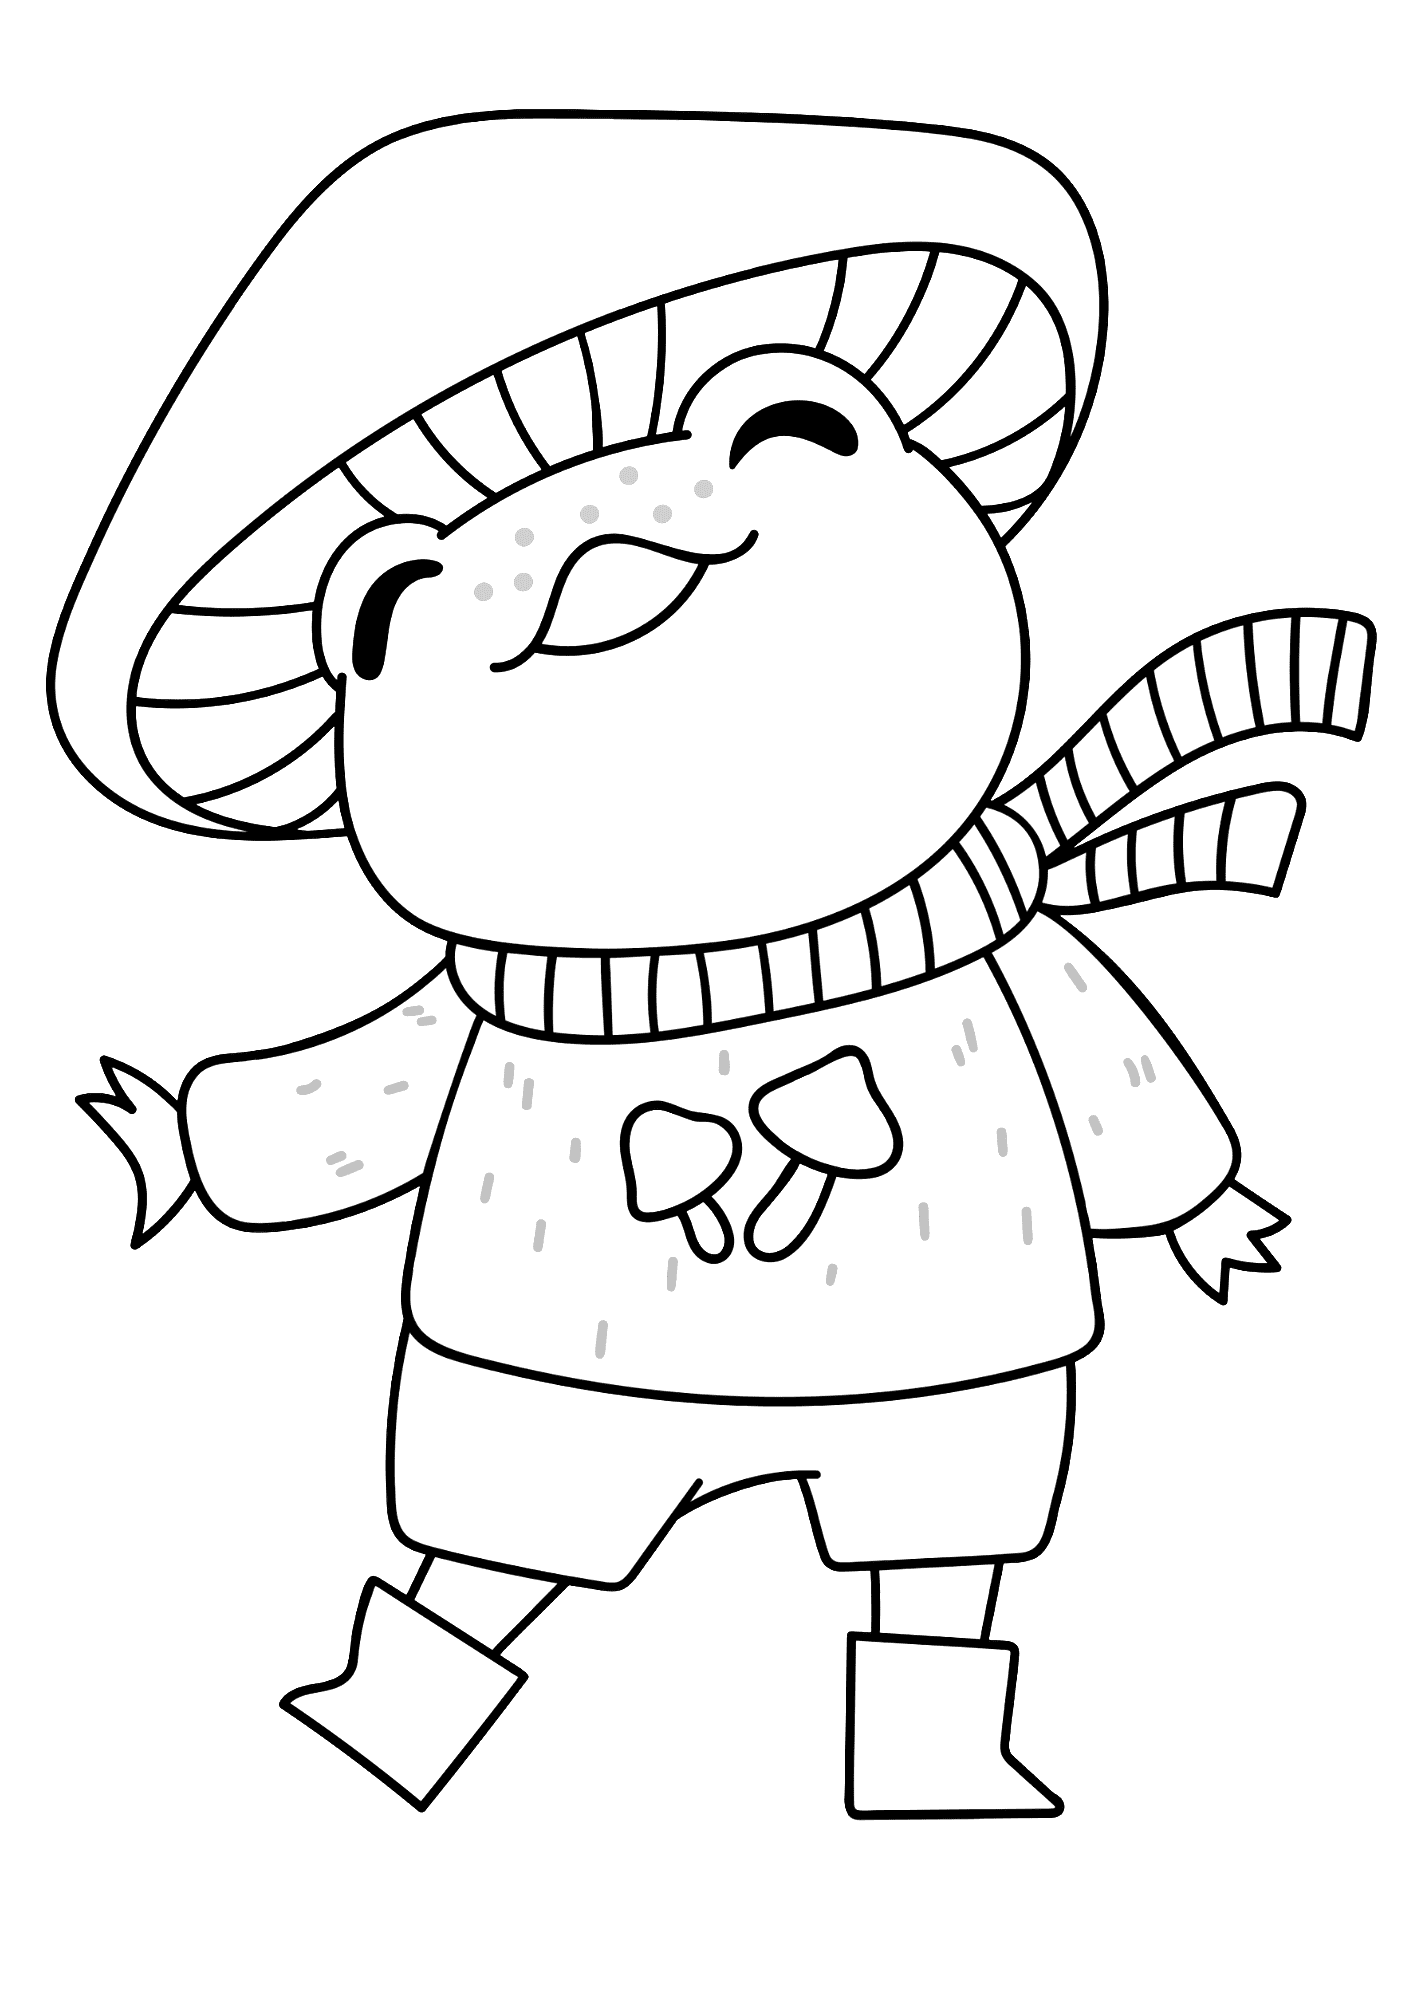 Picture Of Frog Coloring Page